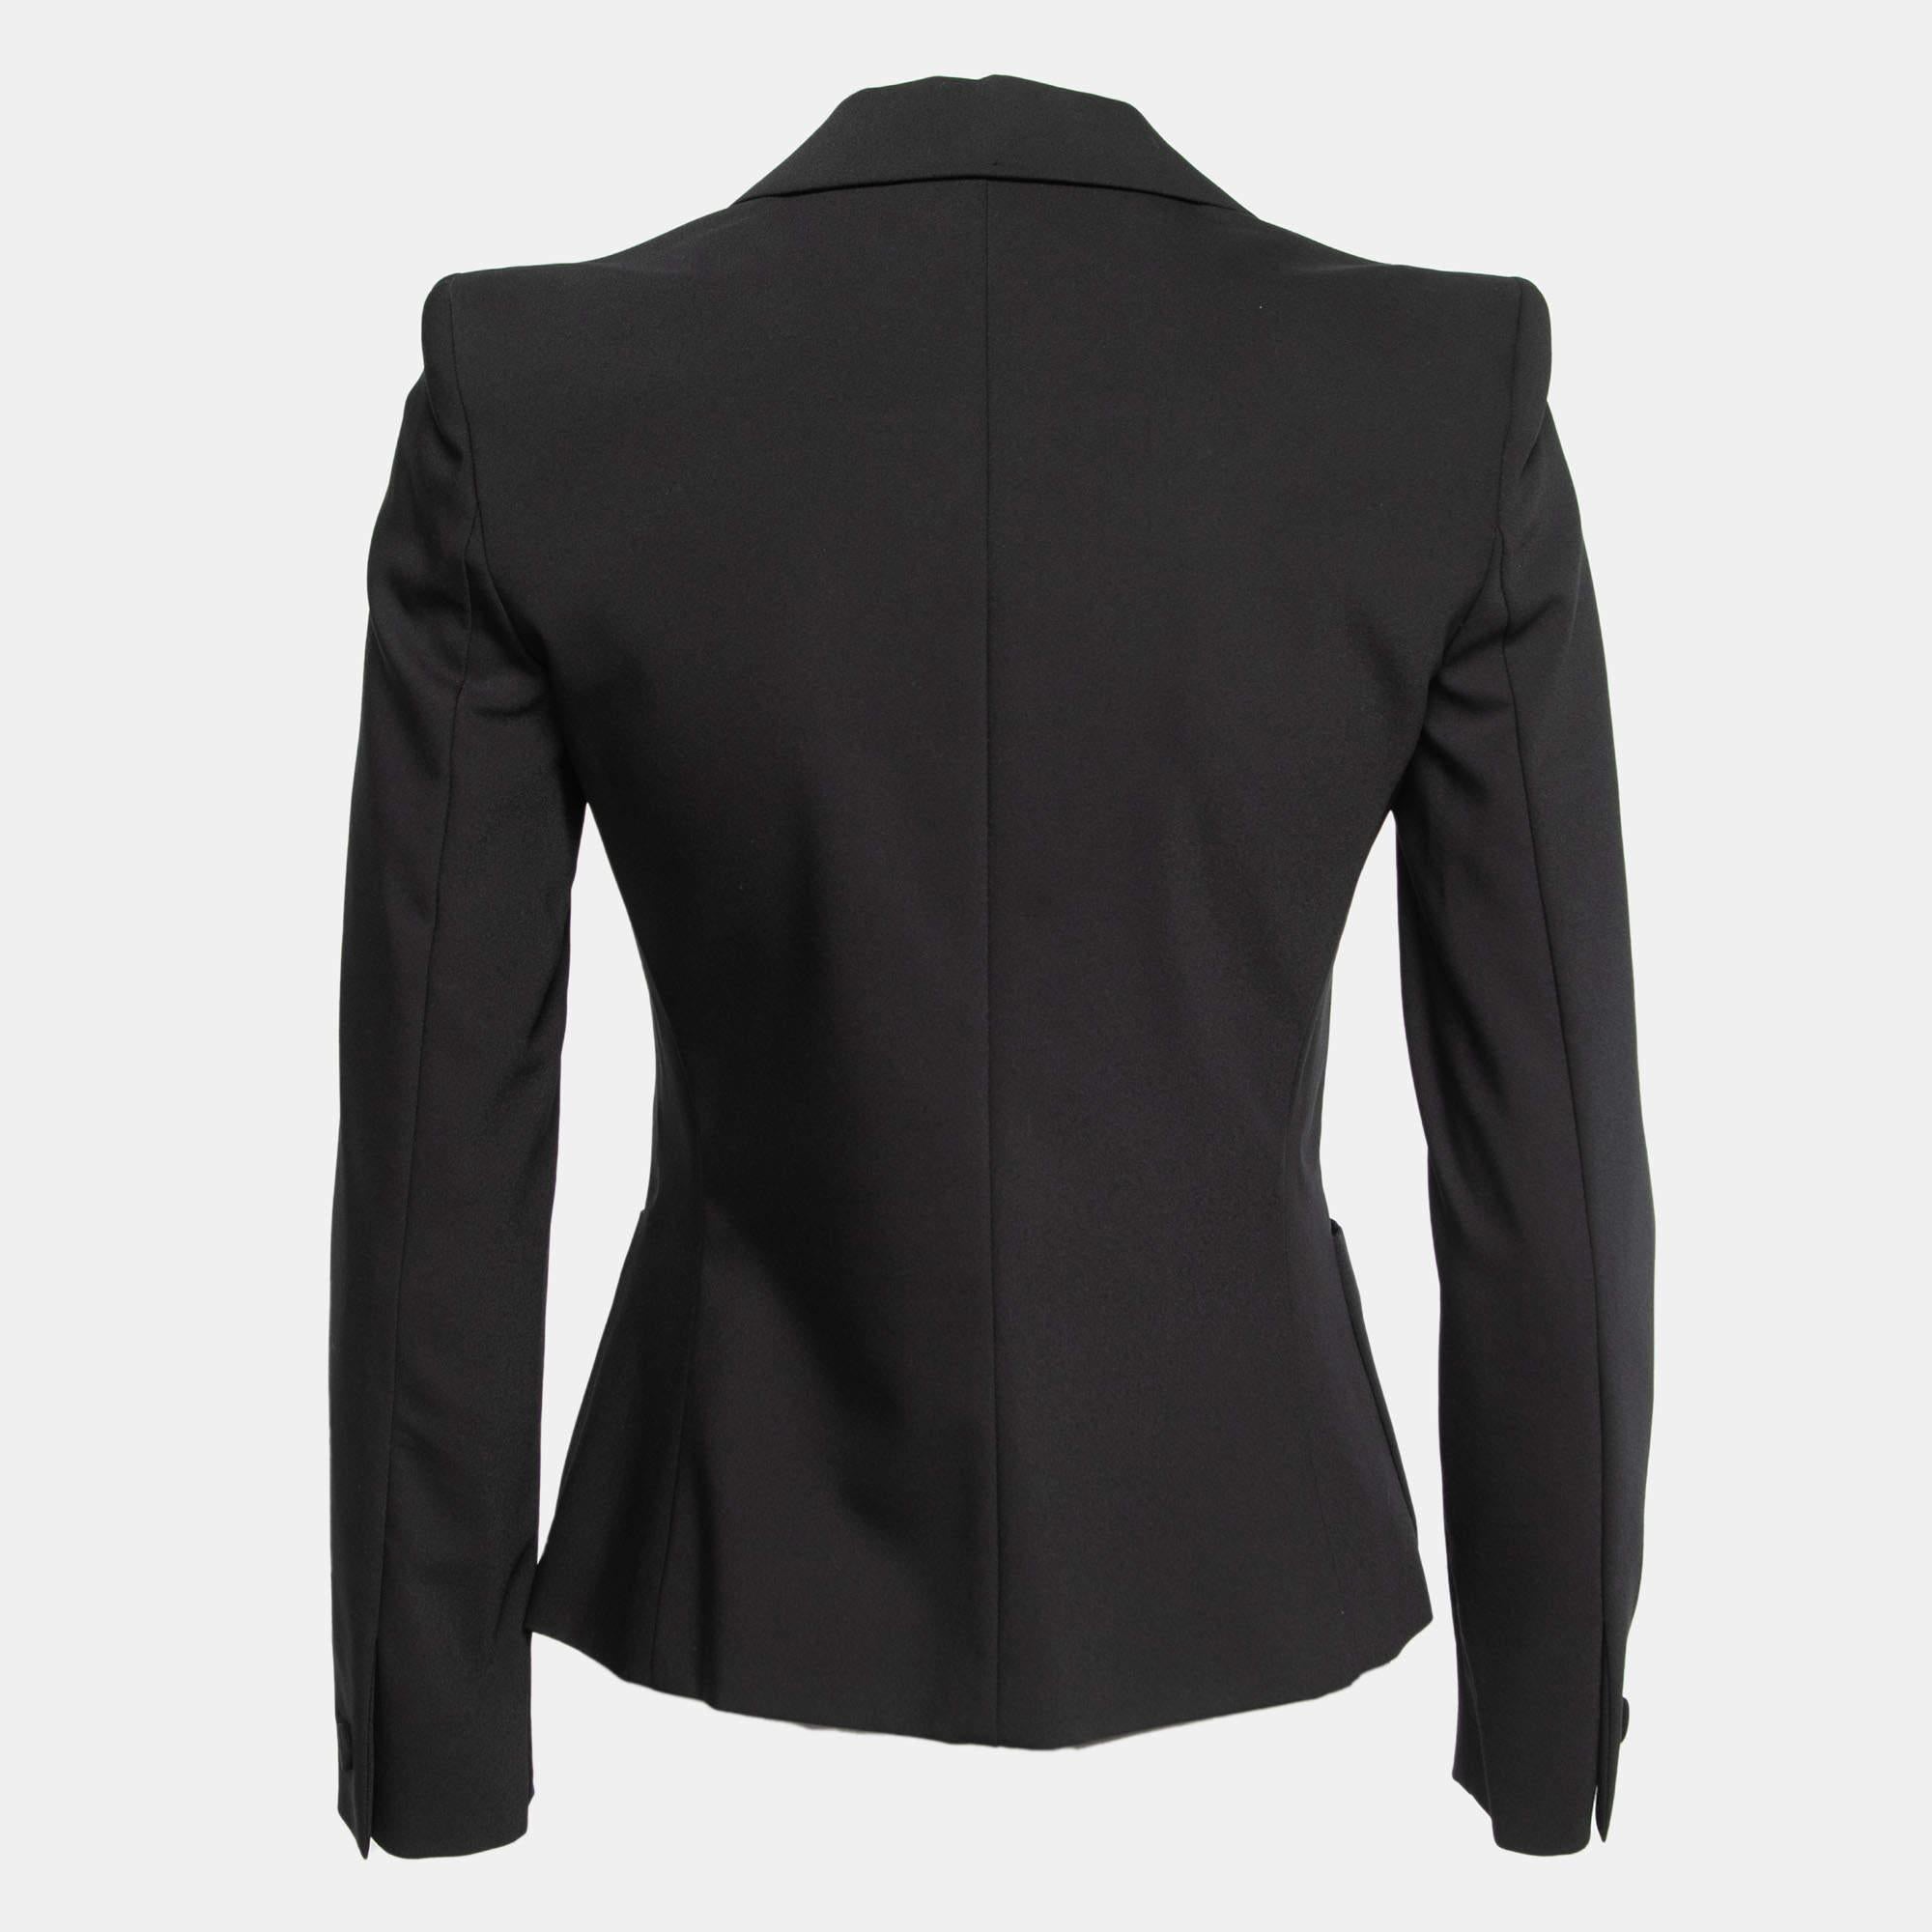 This blazer brings you both class and luxury as you wear it. It is highlighted with long sleeves and classic details, thus granting a polished, formal finish.

